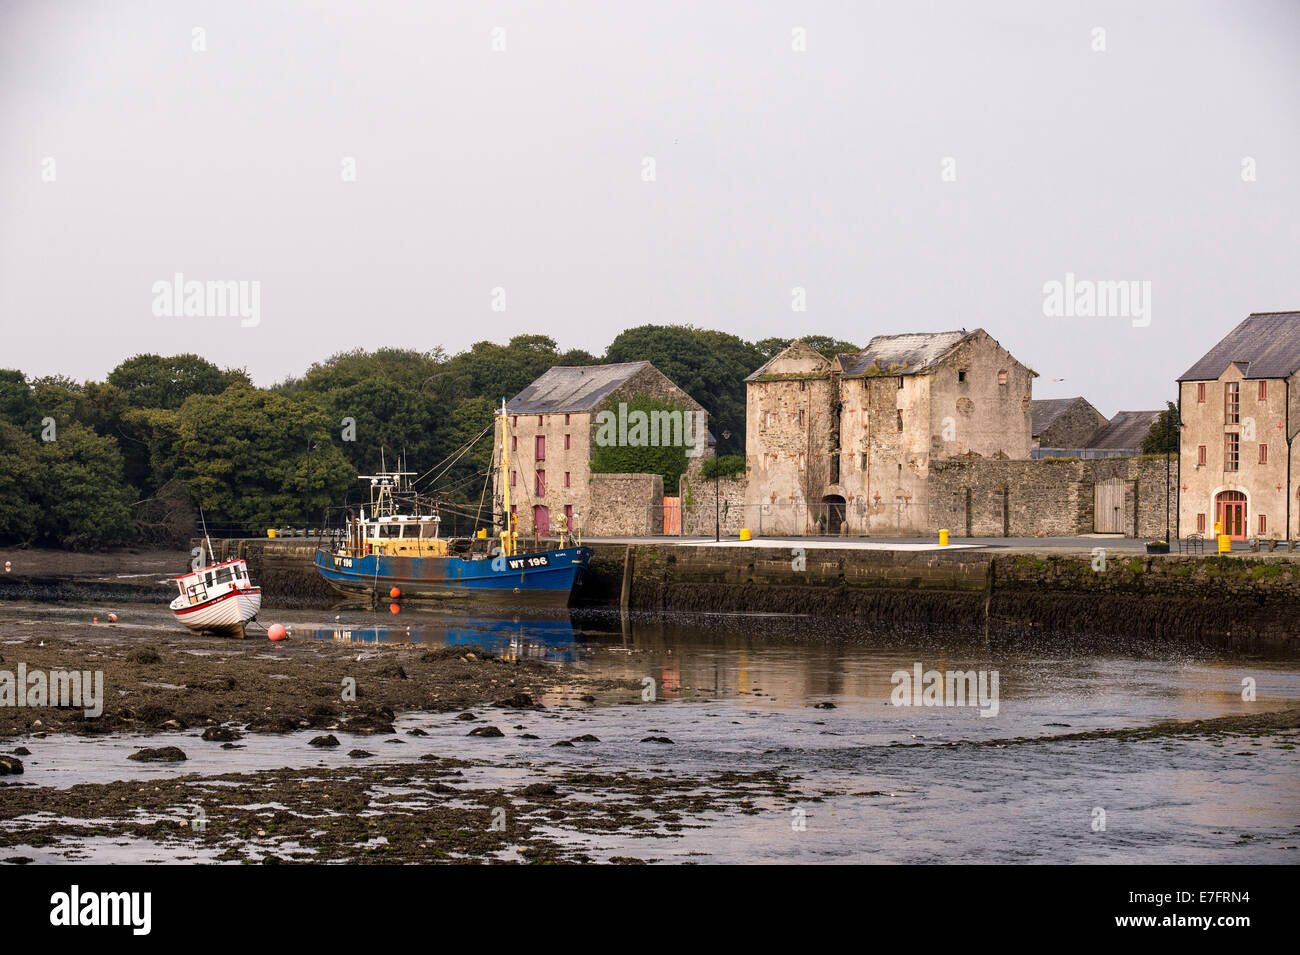 Old warehouses at Ramelton Pier, on the River Lennon, County Donegal, Ireland, Europe Stock Photo